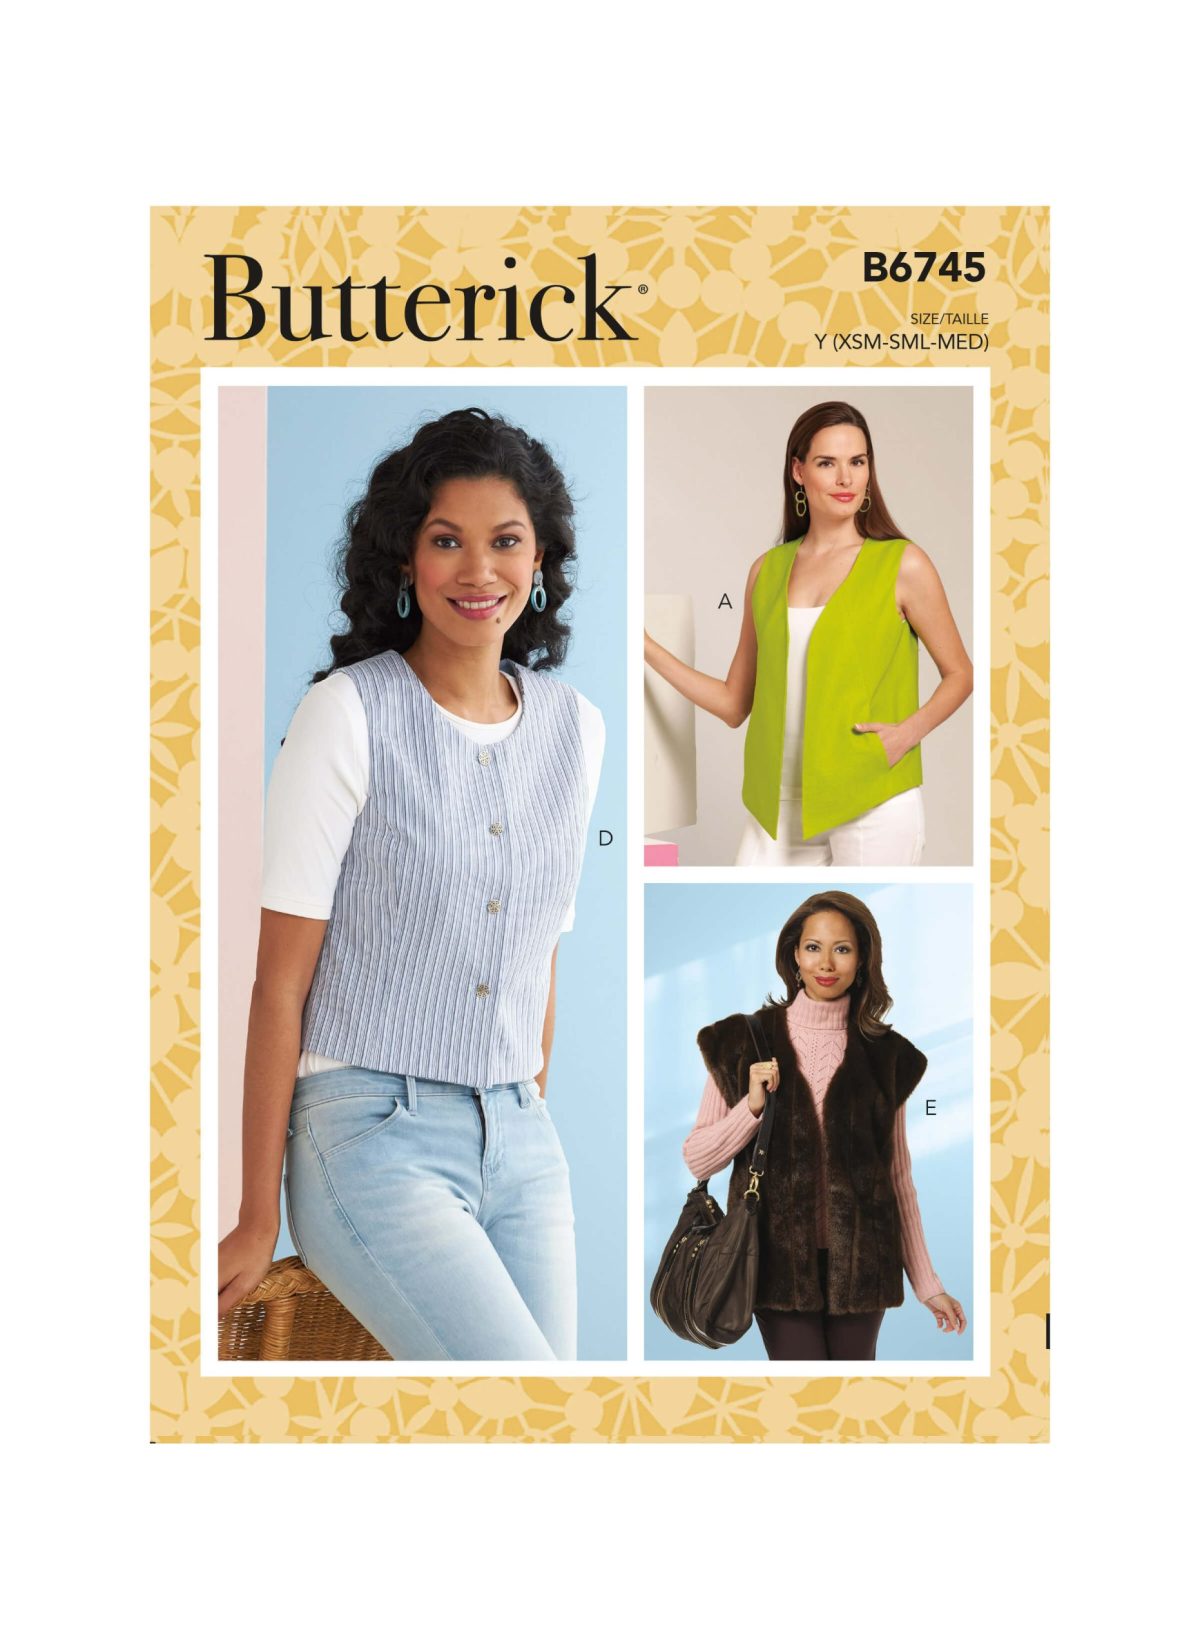 Butterick Sewing Pattern B6745 Misses' Waistcoats in Five Styles